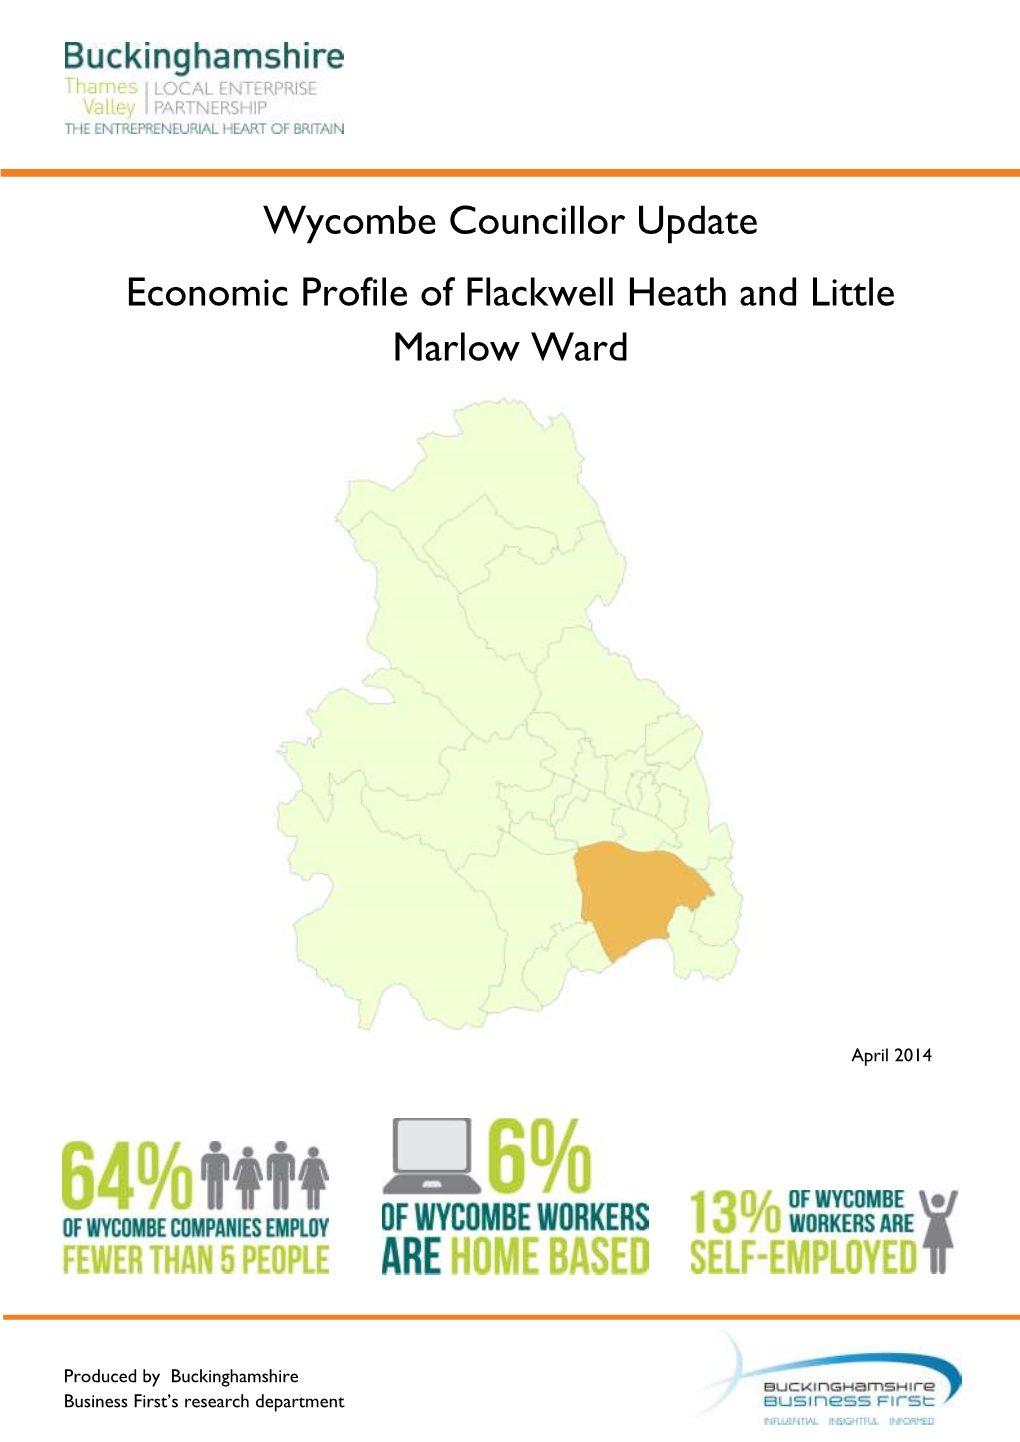 Wycombe Councillor Update Economic Profile of Flackwell Heath and Little Marlow Ward